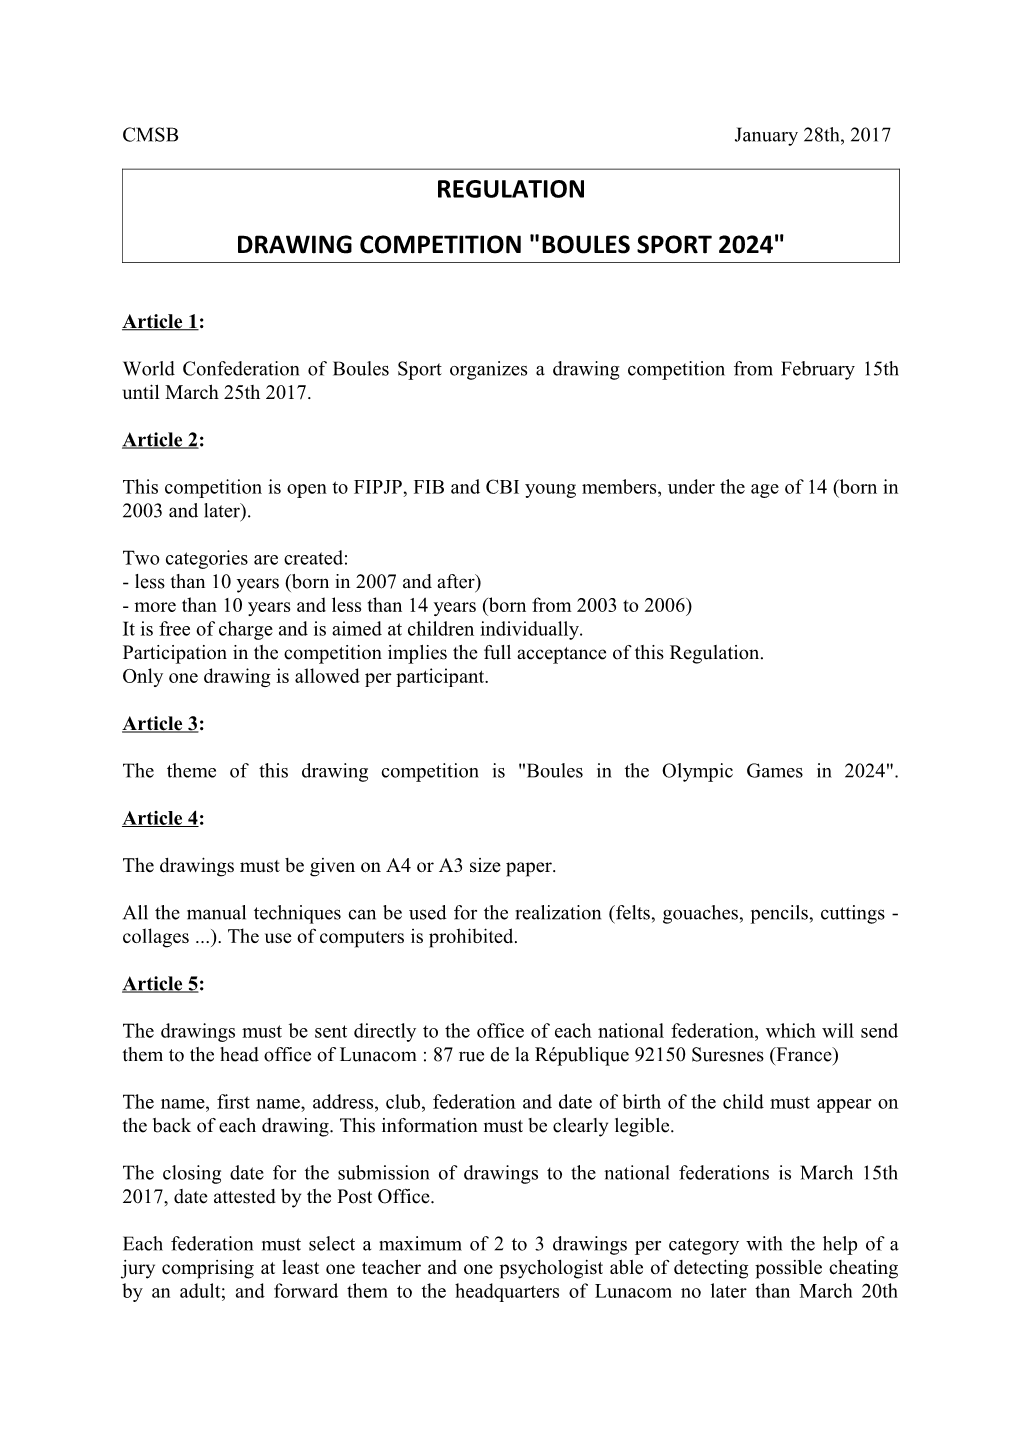 Drawing Competition Boules Sport 2024